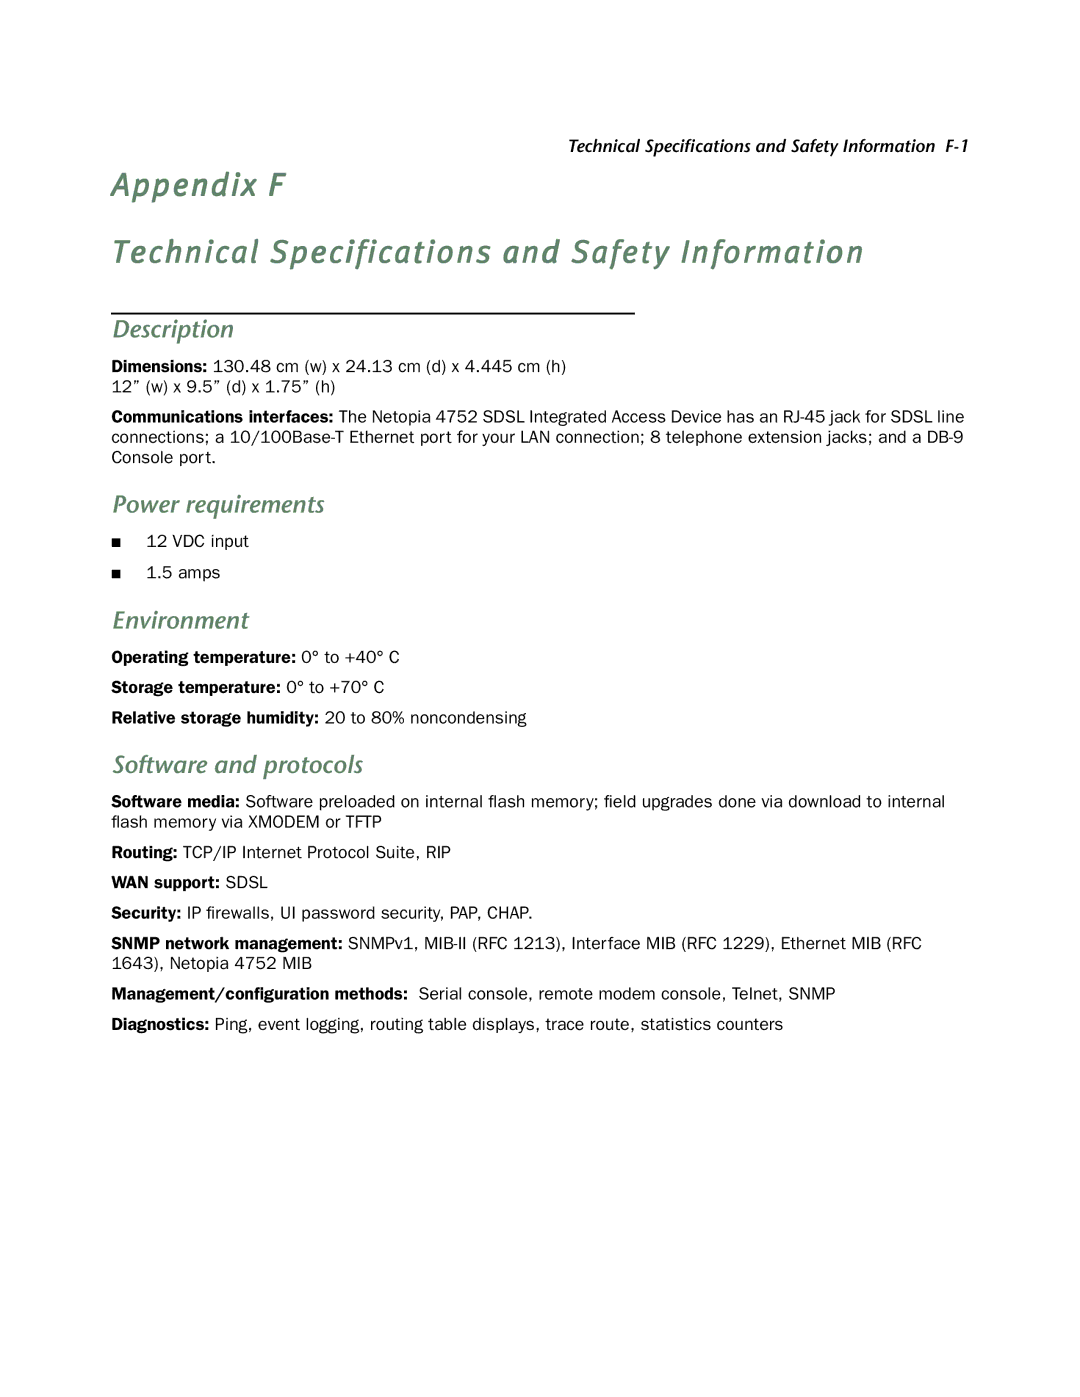 Netopia 4752 Appendix F Technical Specifications and Safety Information, Description, Power requirements, Environment 